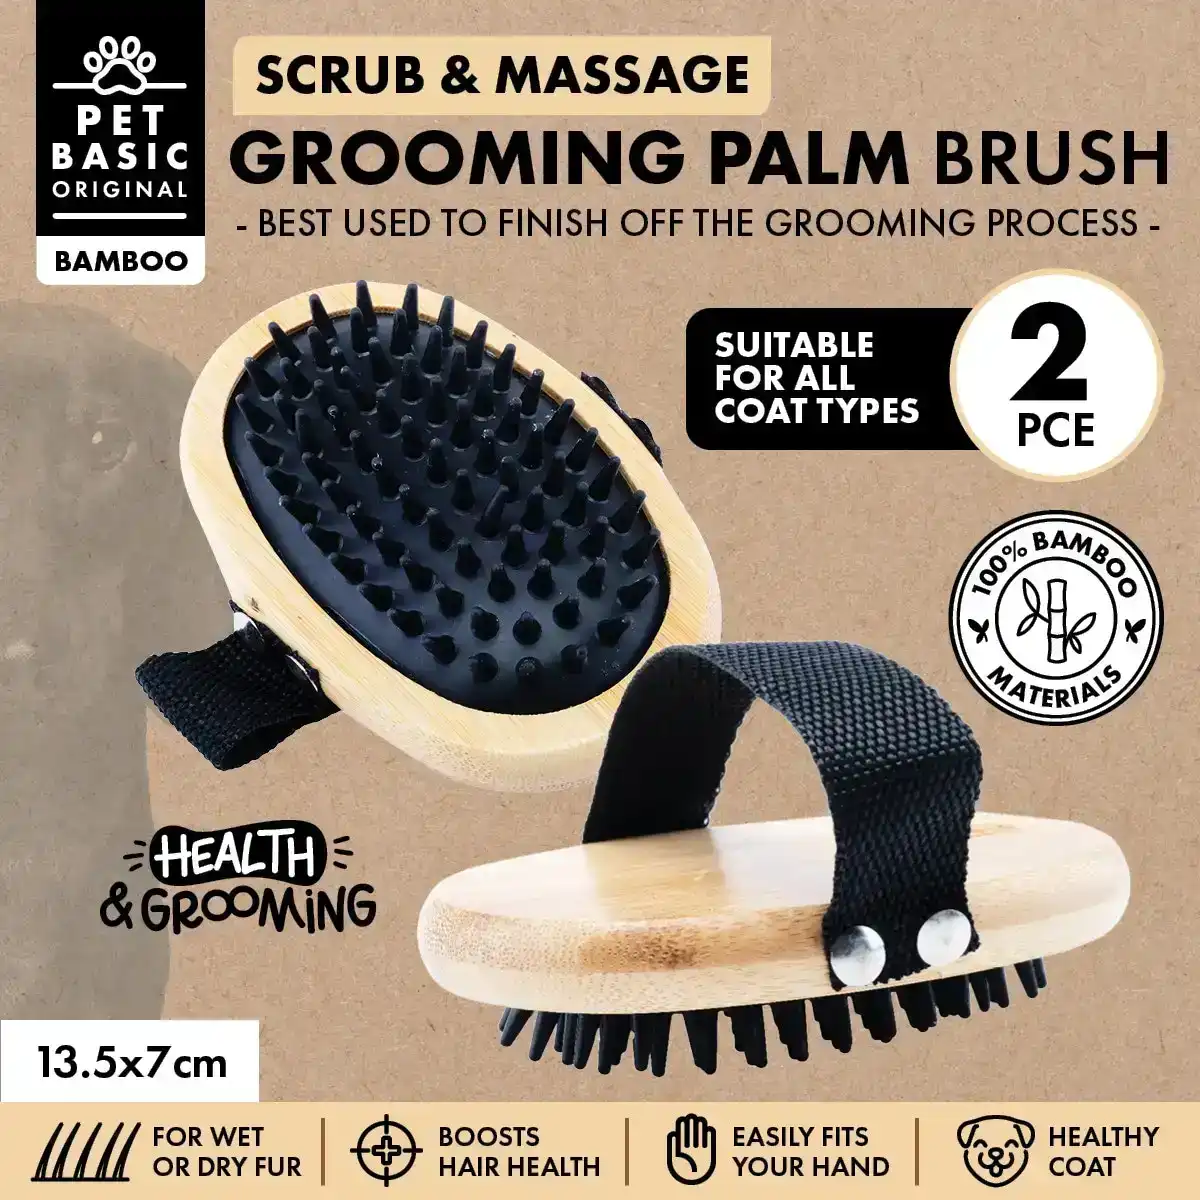 Pet Basic® 2PCE Massage Grooming Palm Brush Soothing & Gentle Wet/Dry 13.5cm